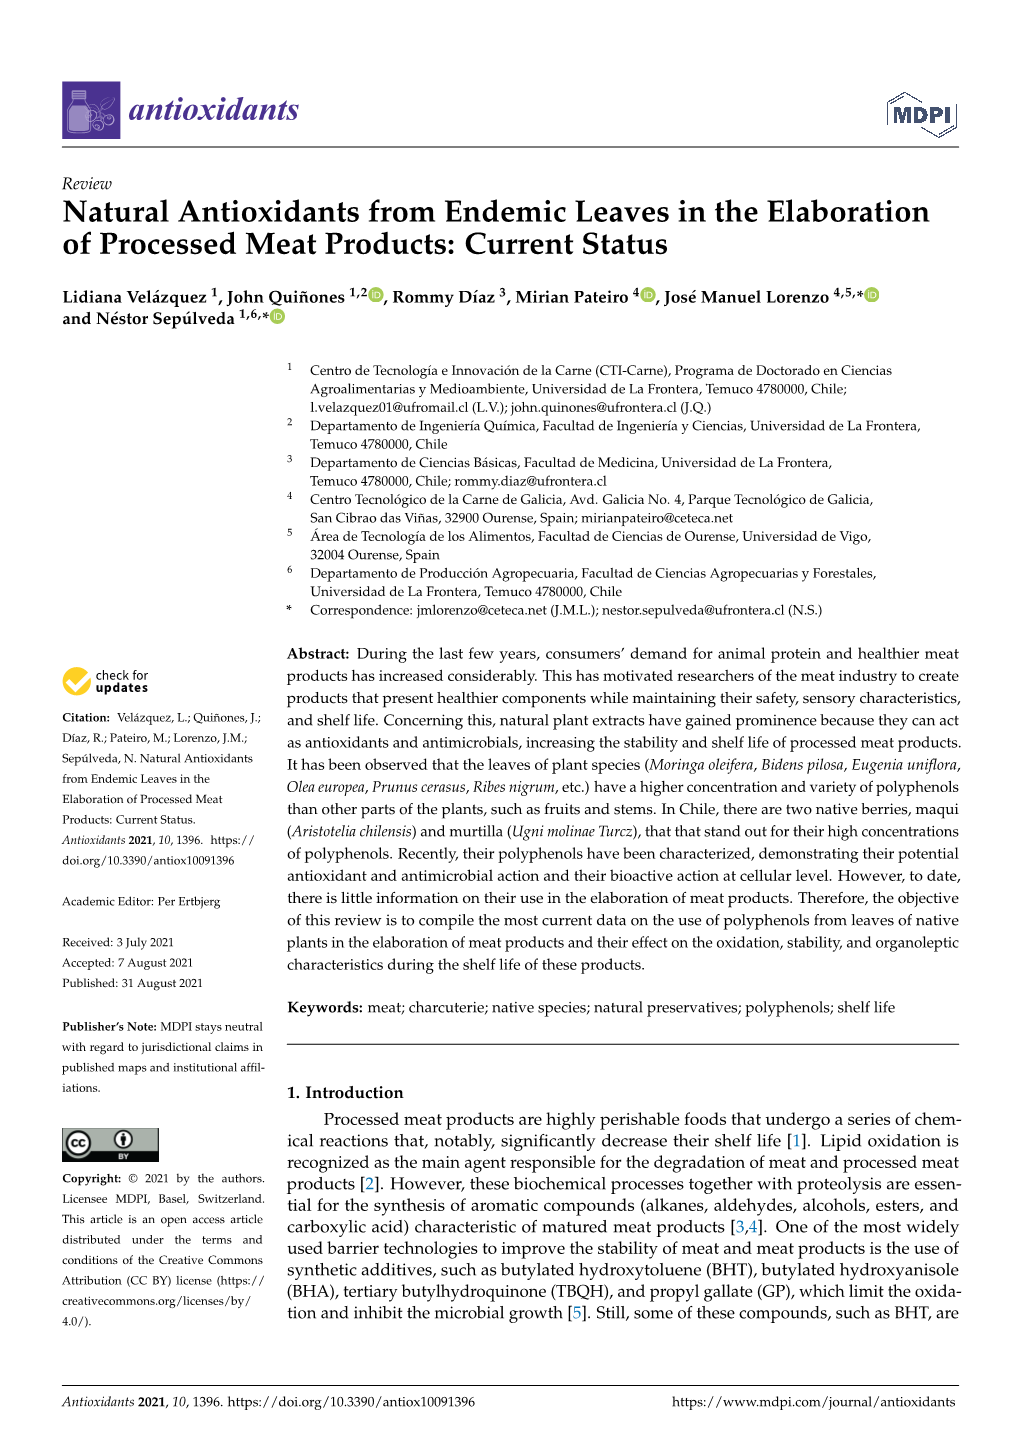 Natural Antioxidants from Endemic Leaves in the Elaboration of Processed Meat Products: Current Status